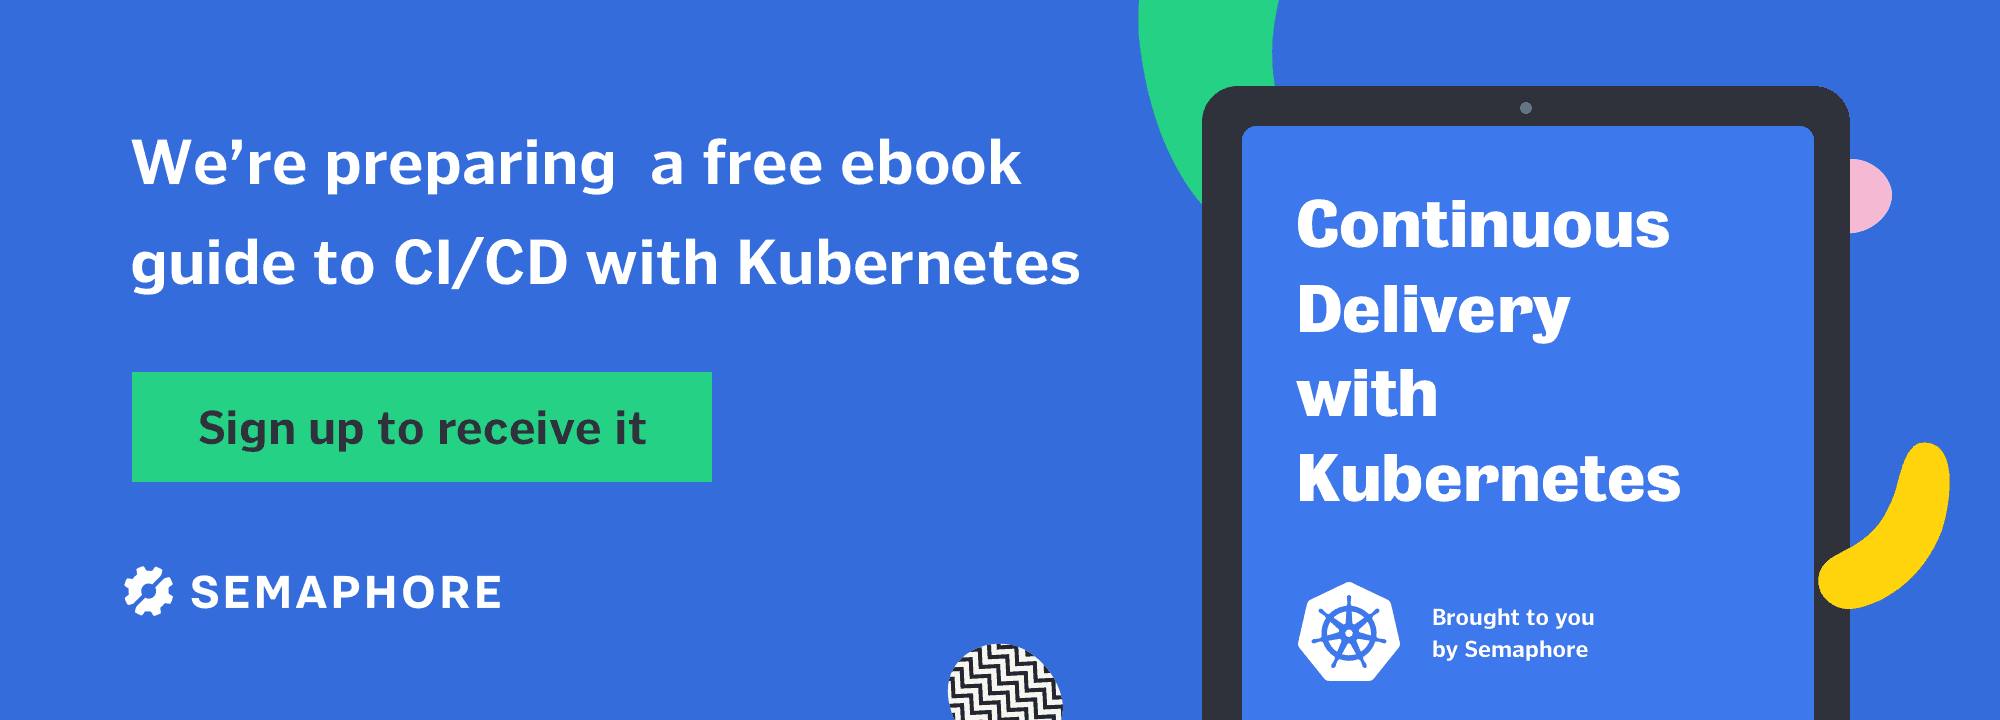 Sign up for free CI/CD with Kubernetes ebook